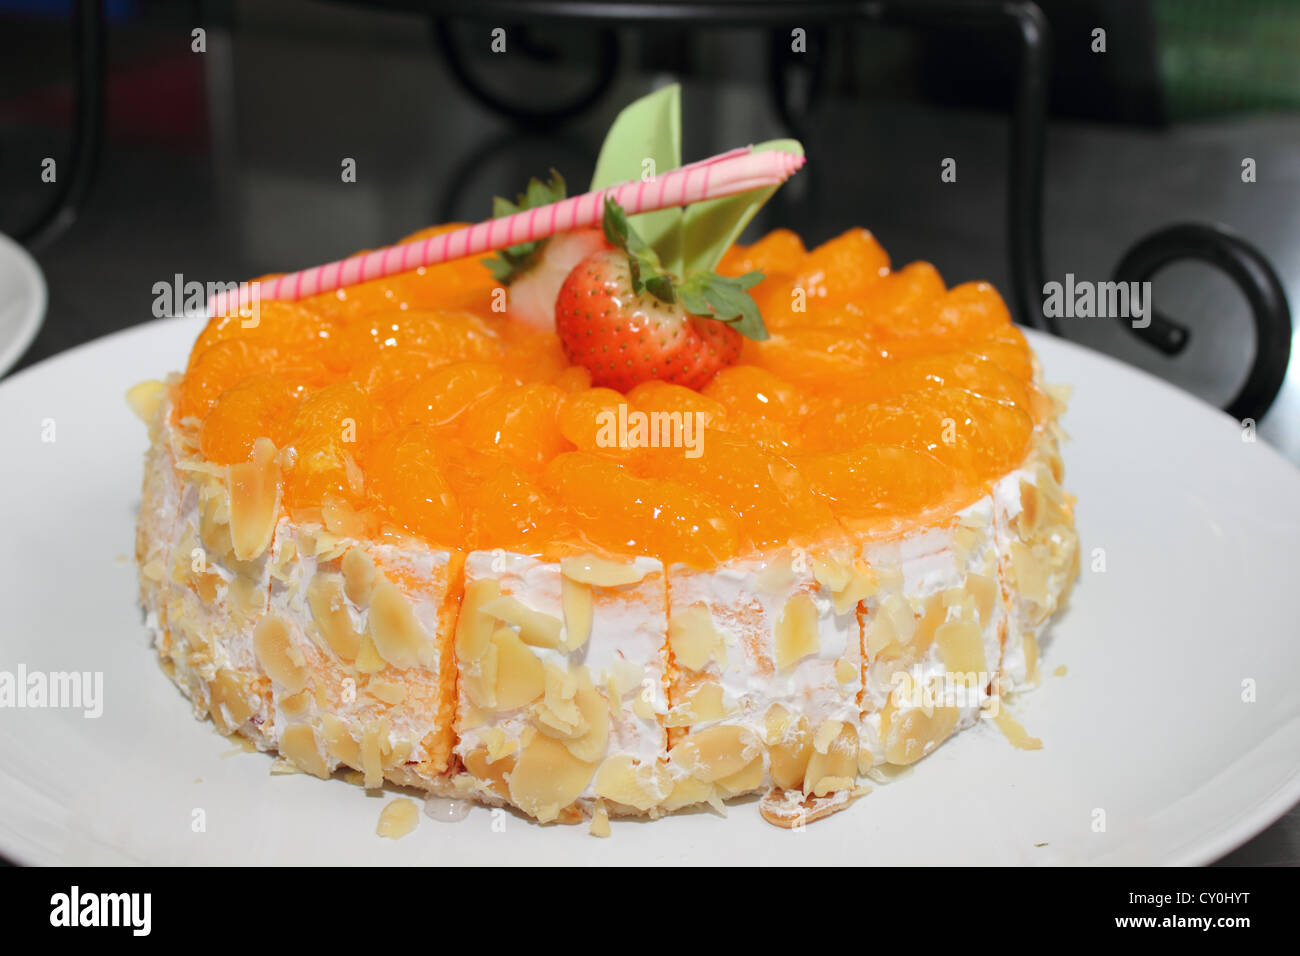 The Orange cake and toping with fruit Stock Photo